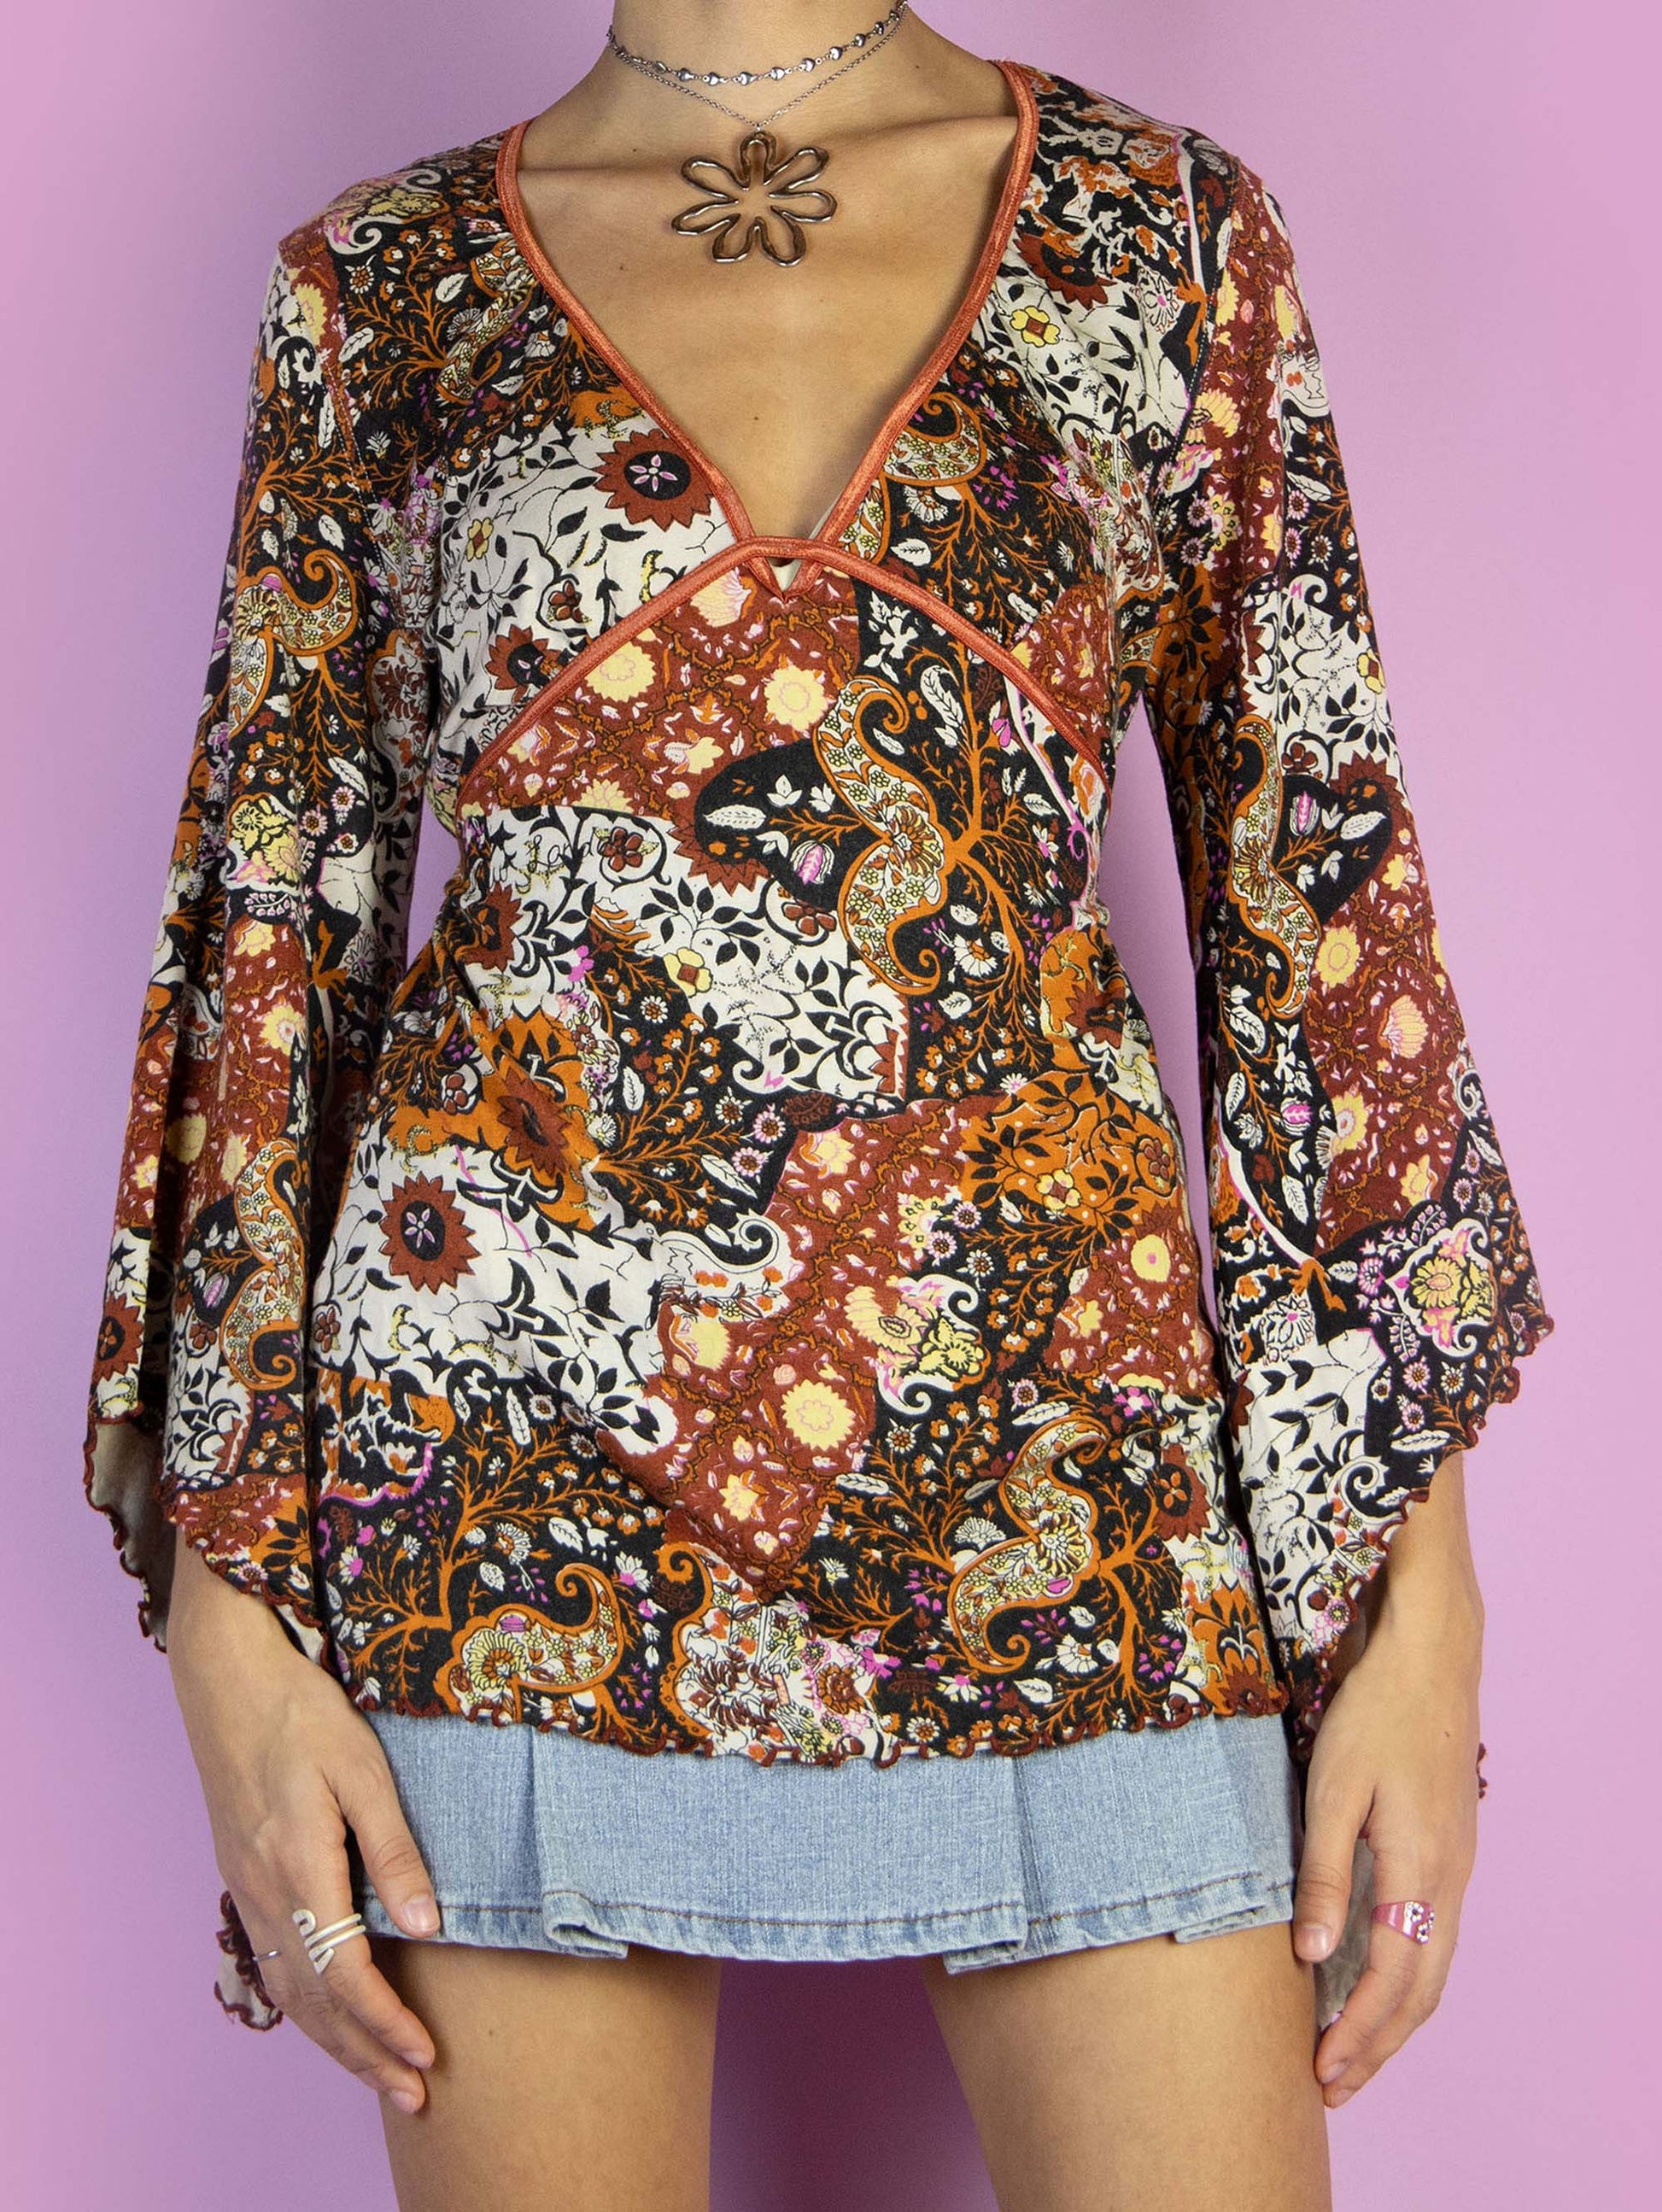 The Y2K Boho Bell Sleeve Top is a vintage multicolored orange top with an abstract paisley floral print, a V-neck, and ties at the back. Cyber fairy grunge 2000s graphic blouse.